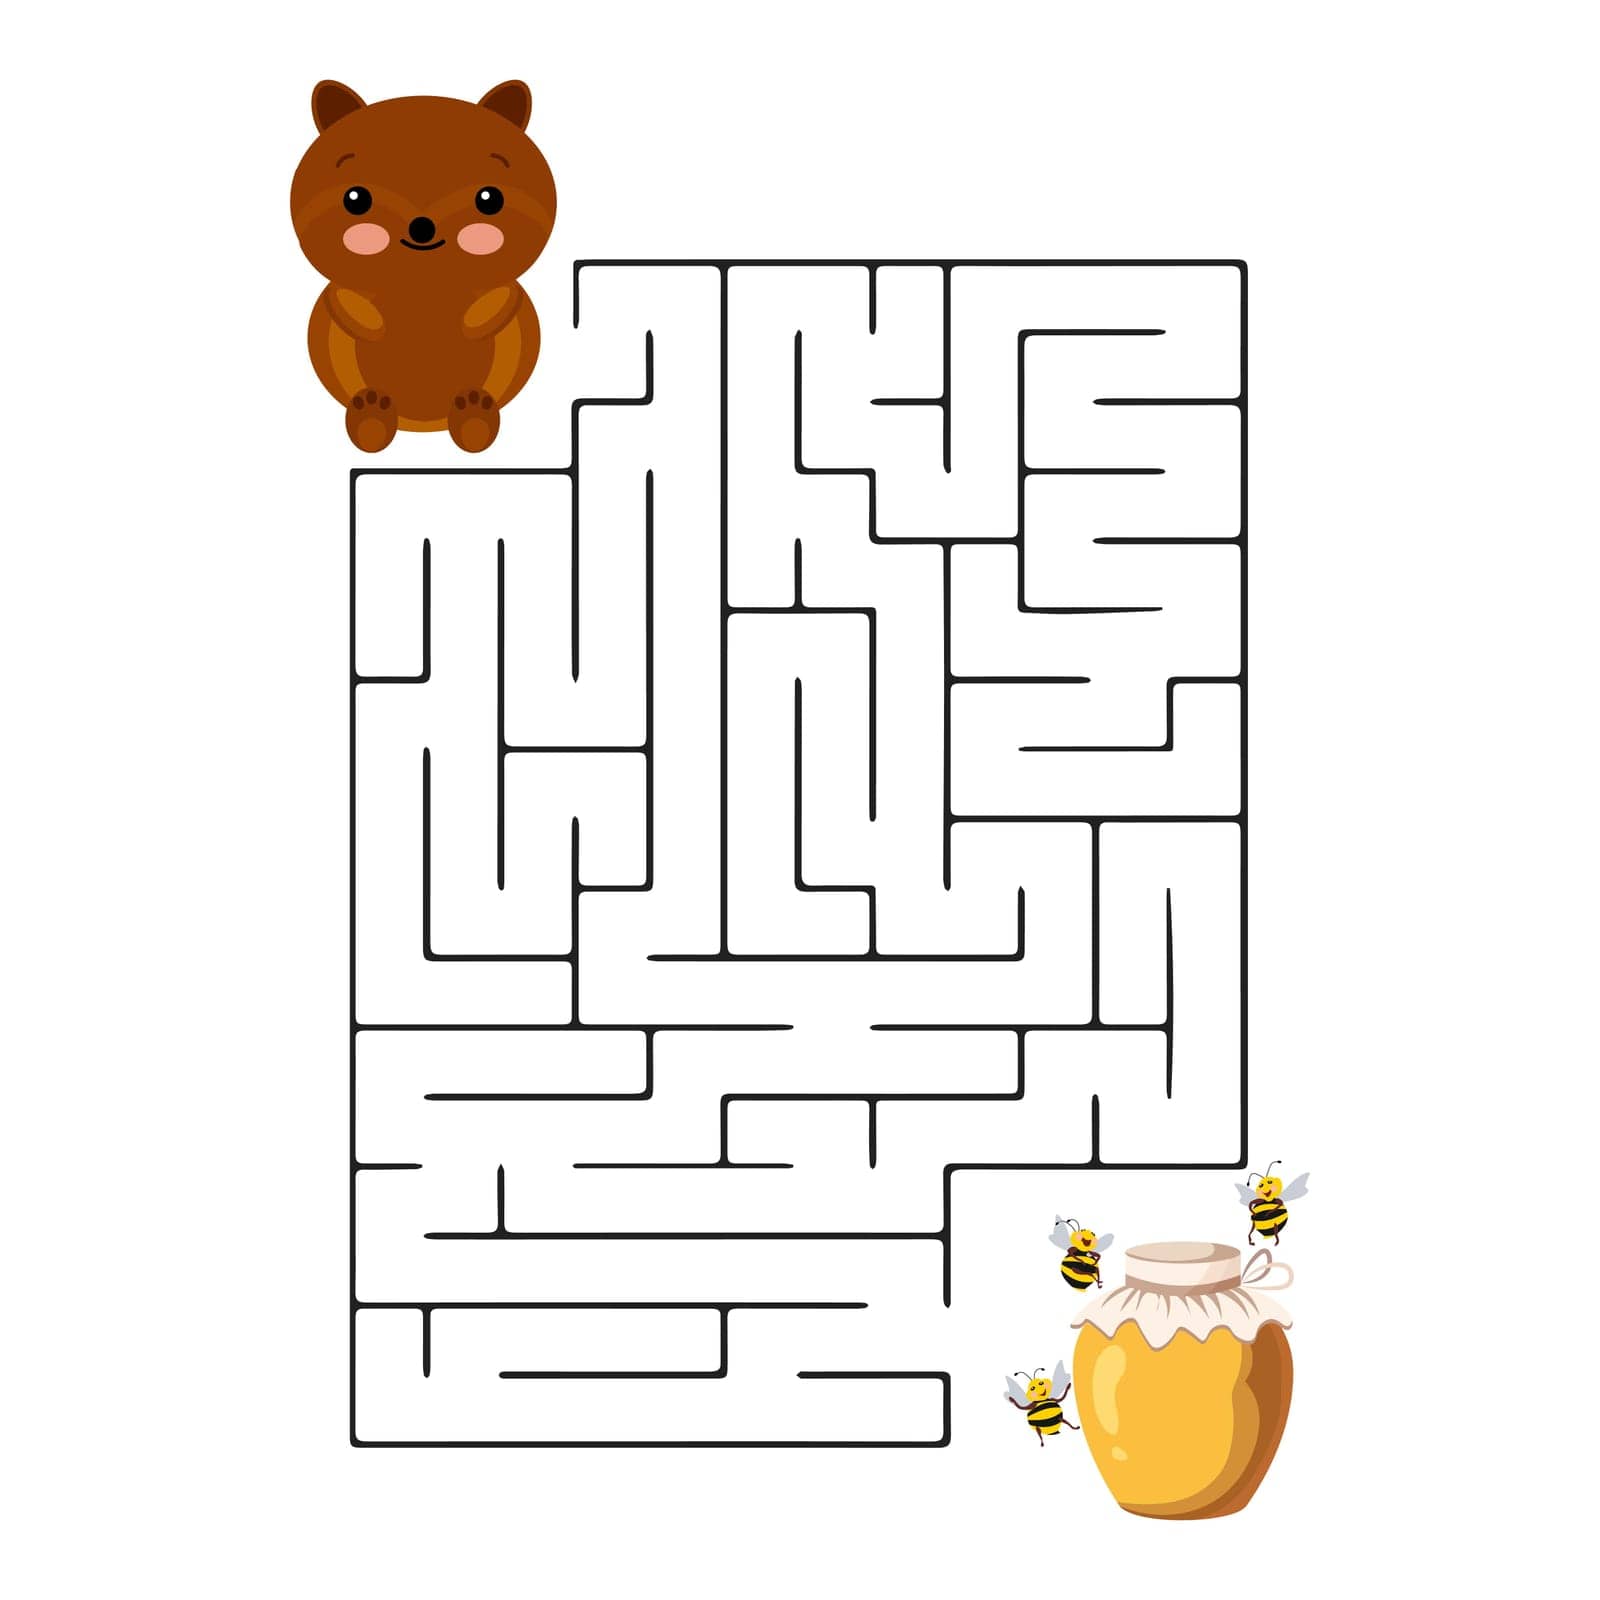 Children's maze with animals, a cute bear and a barrel of honey. Illustration by VS1959